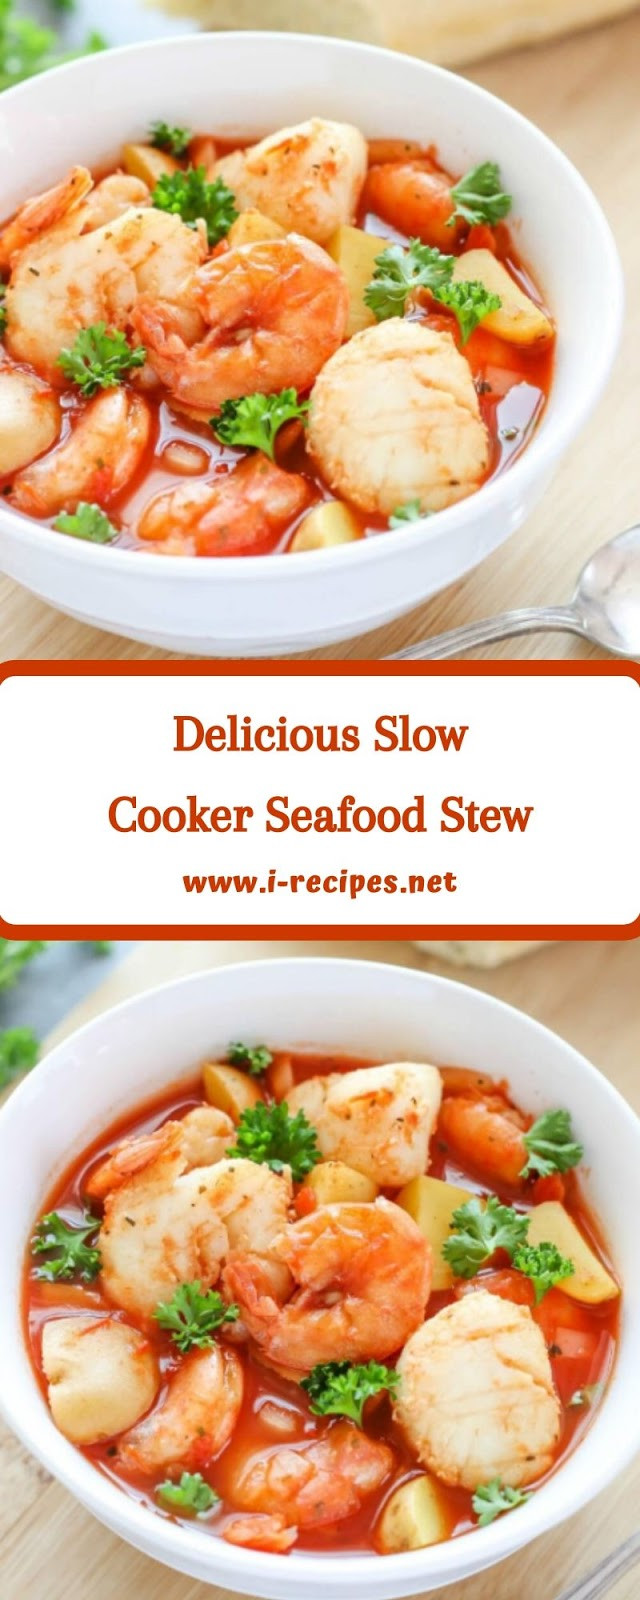 Slow Cooker Seafood Stew
 iRecipes Net Delicious Slow Cooker Seafood Stew